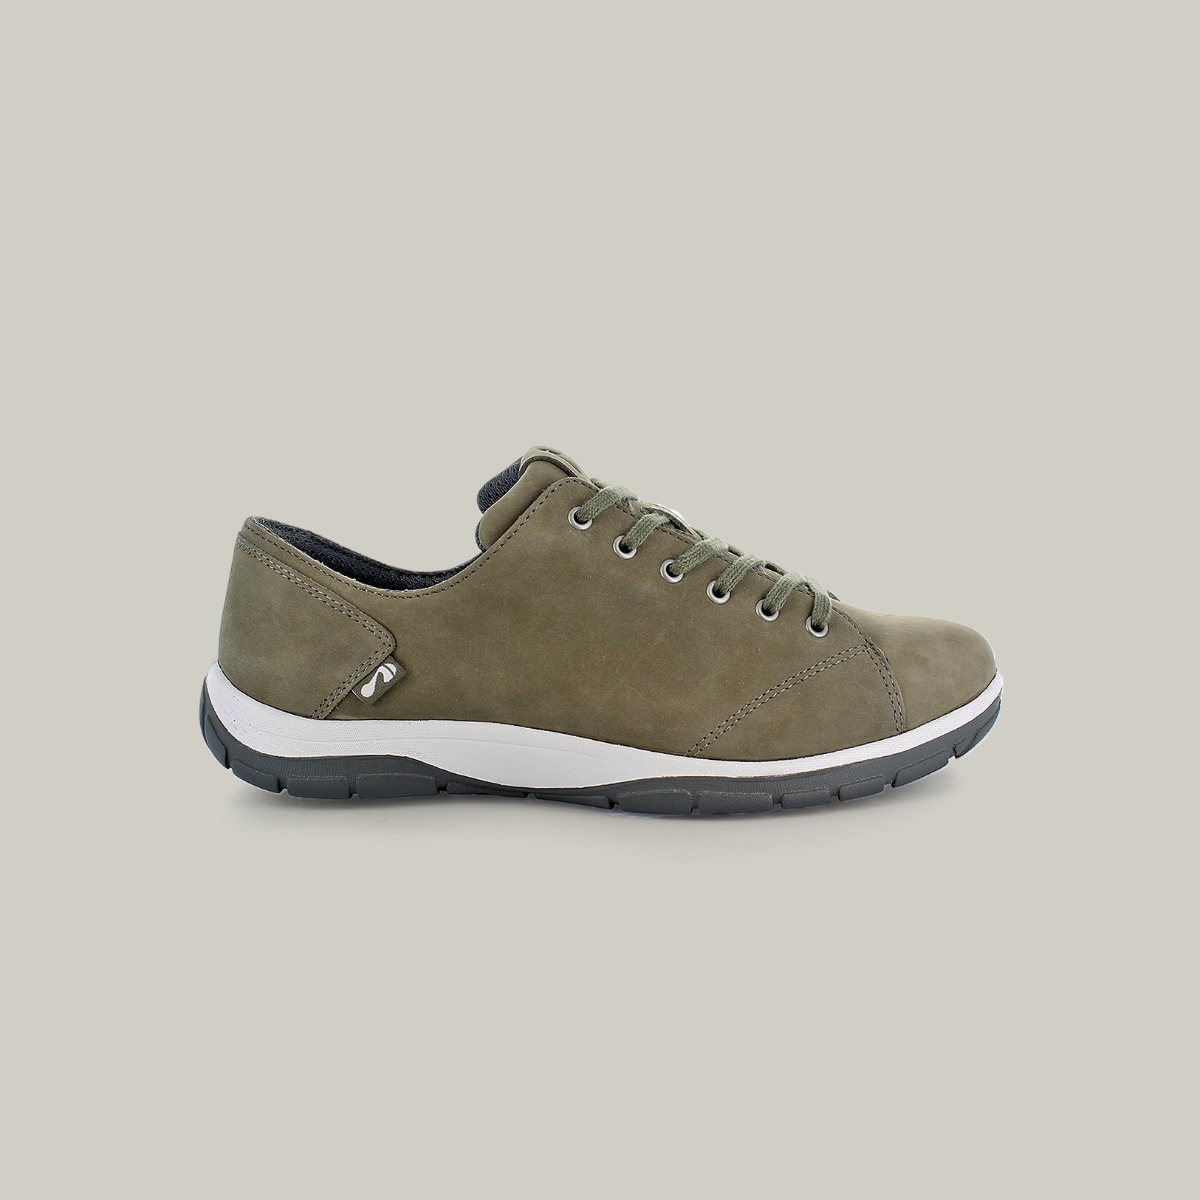 Strive Weston Ivy Green orthotic shoes for women